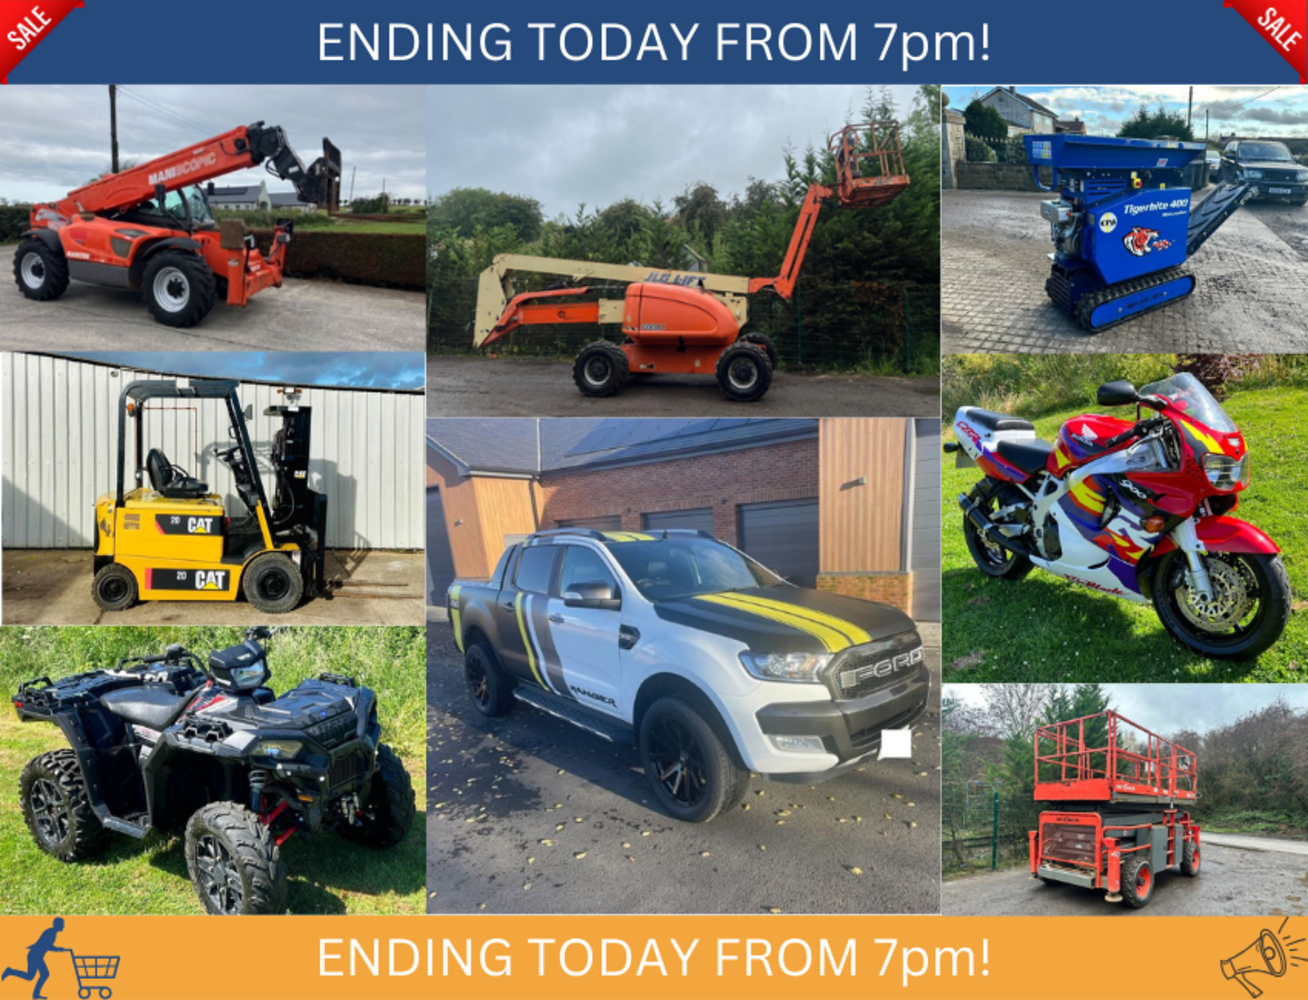 ENDS TODAY 7PM! 2022 RANGE ROVER SPORT, LAND ROVER DISCOVERY, NEW/UNUSED 2023 APACHE FORKLIFT, 2023 VW GOLF, JCB EXCAVATOR, MOWERS & MUCH MORE